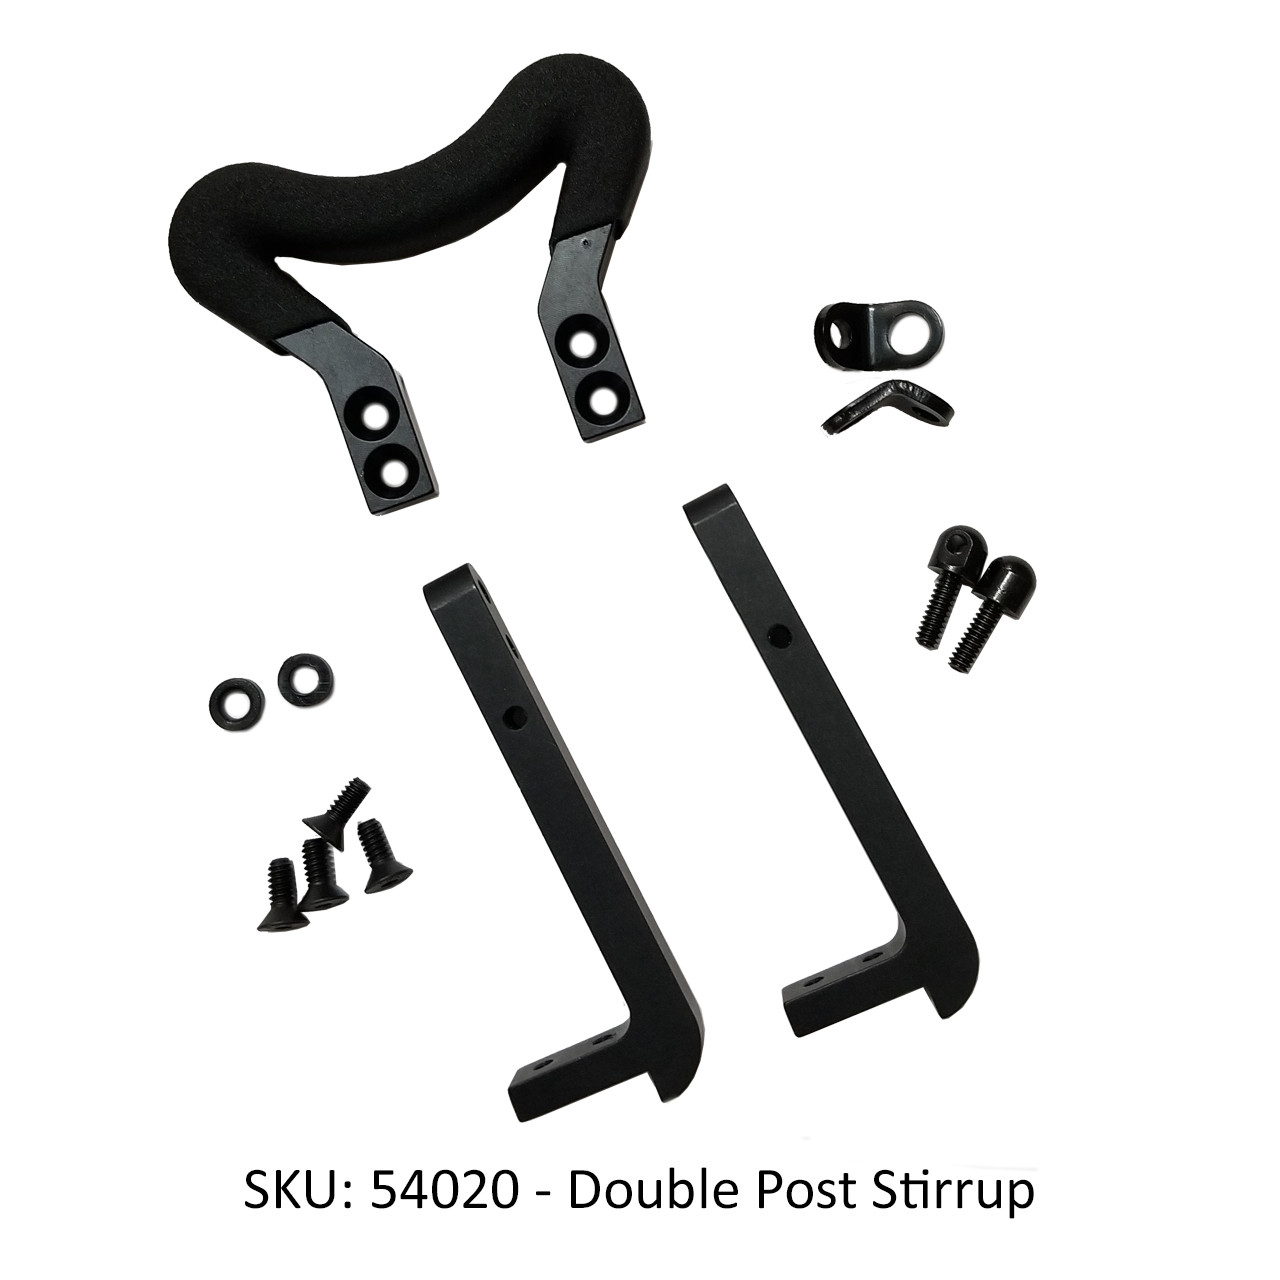 CX Crossbow Replacement Stirrups